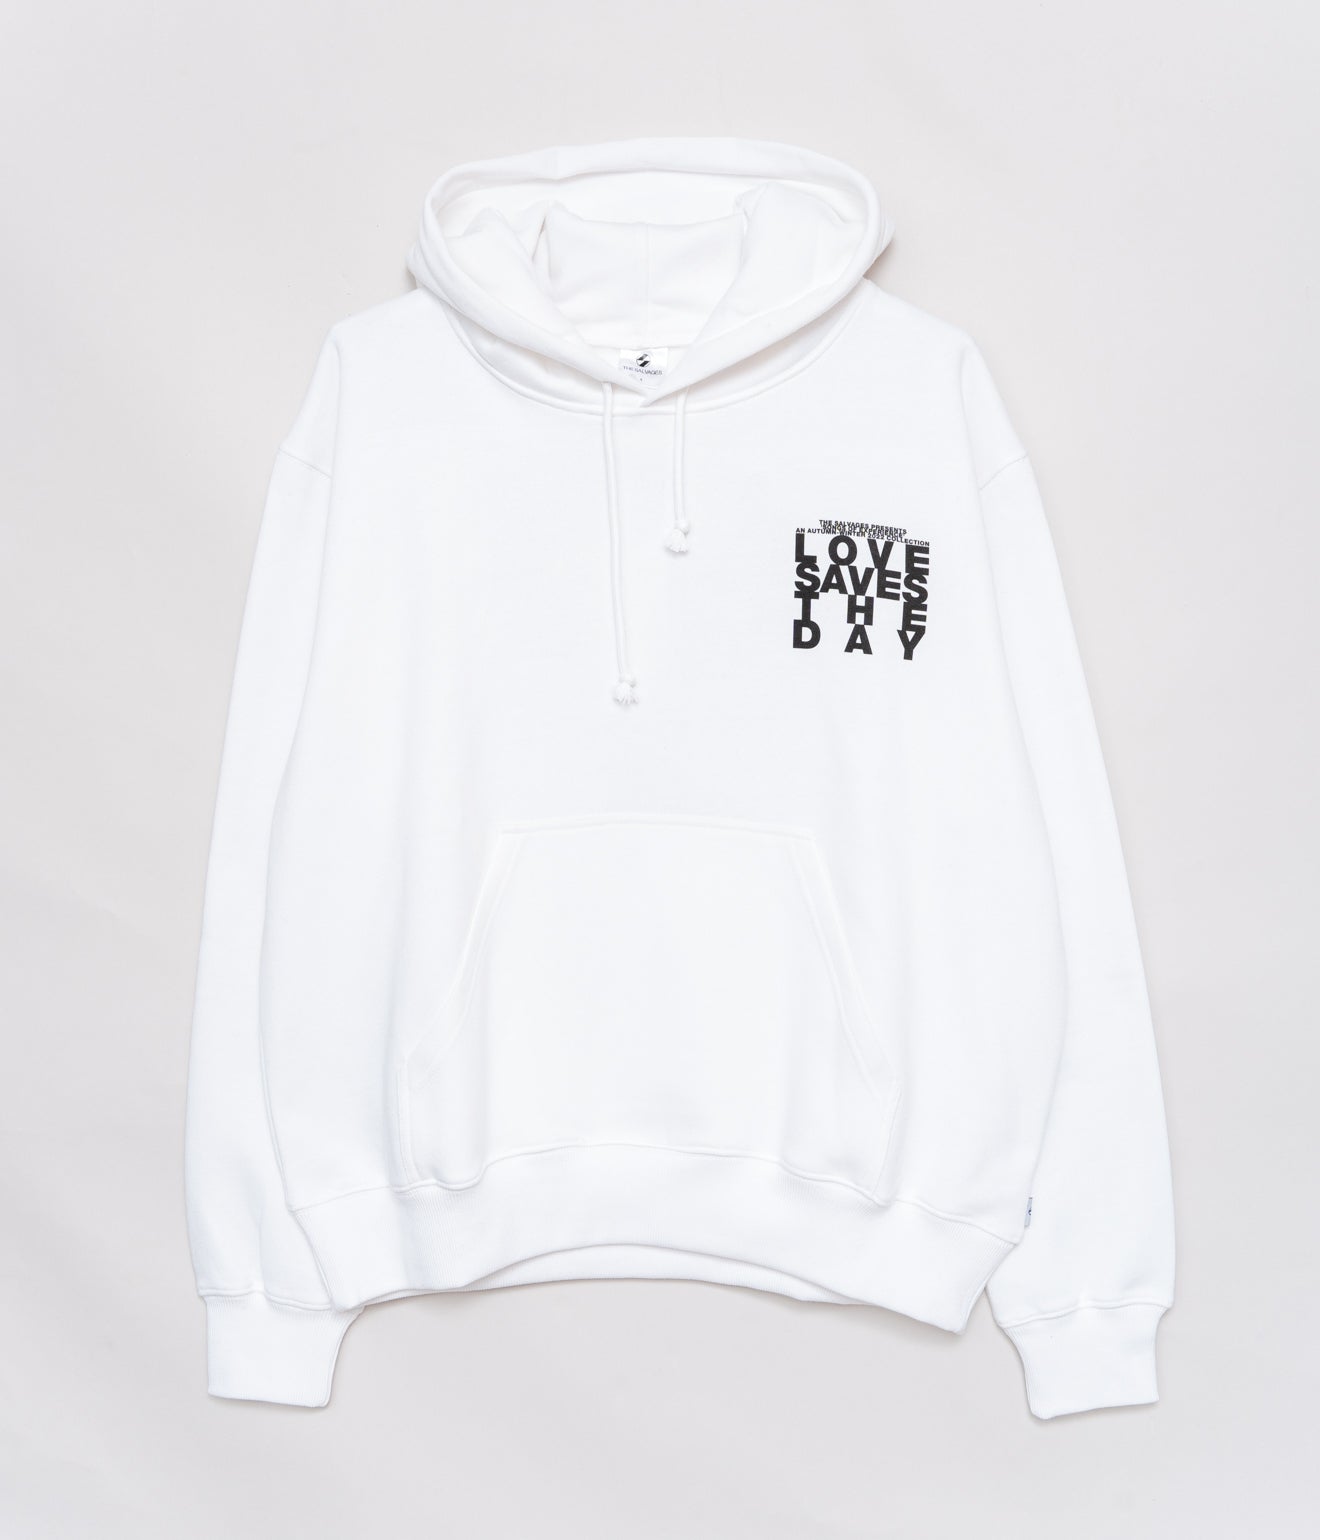 THE SALVAGES "Love Saves The Day Hoodie" White - WEAREALLANIMALS